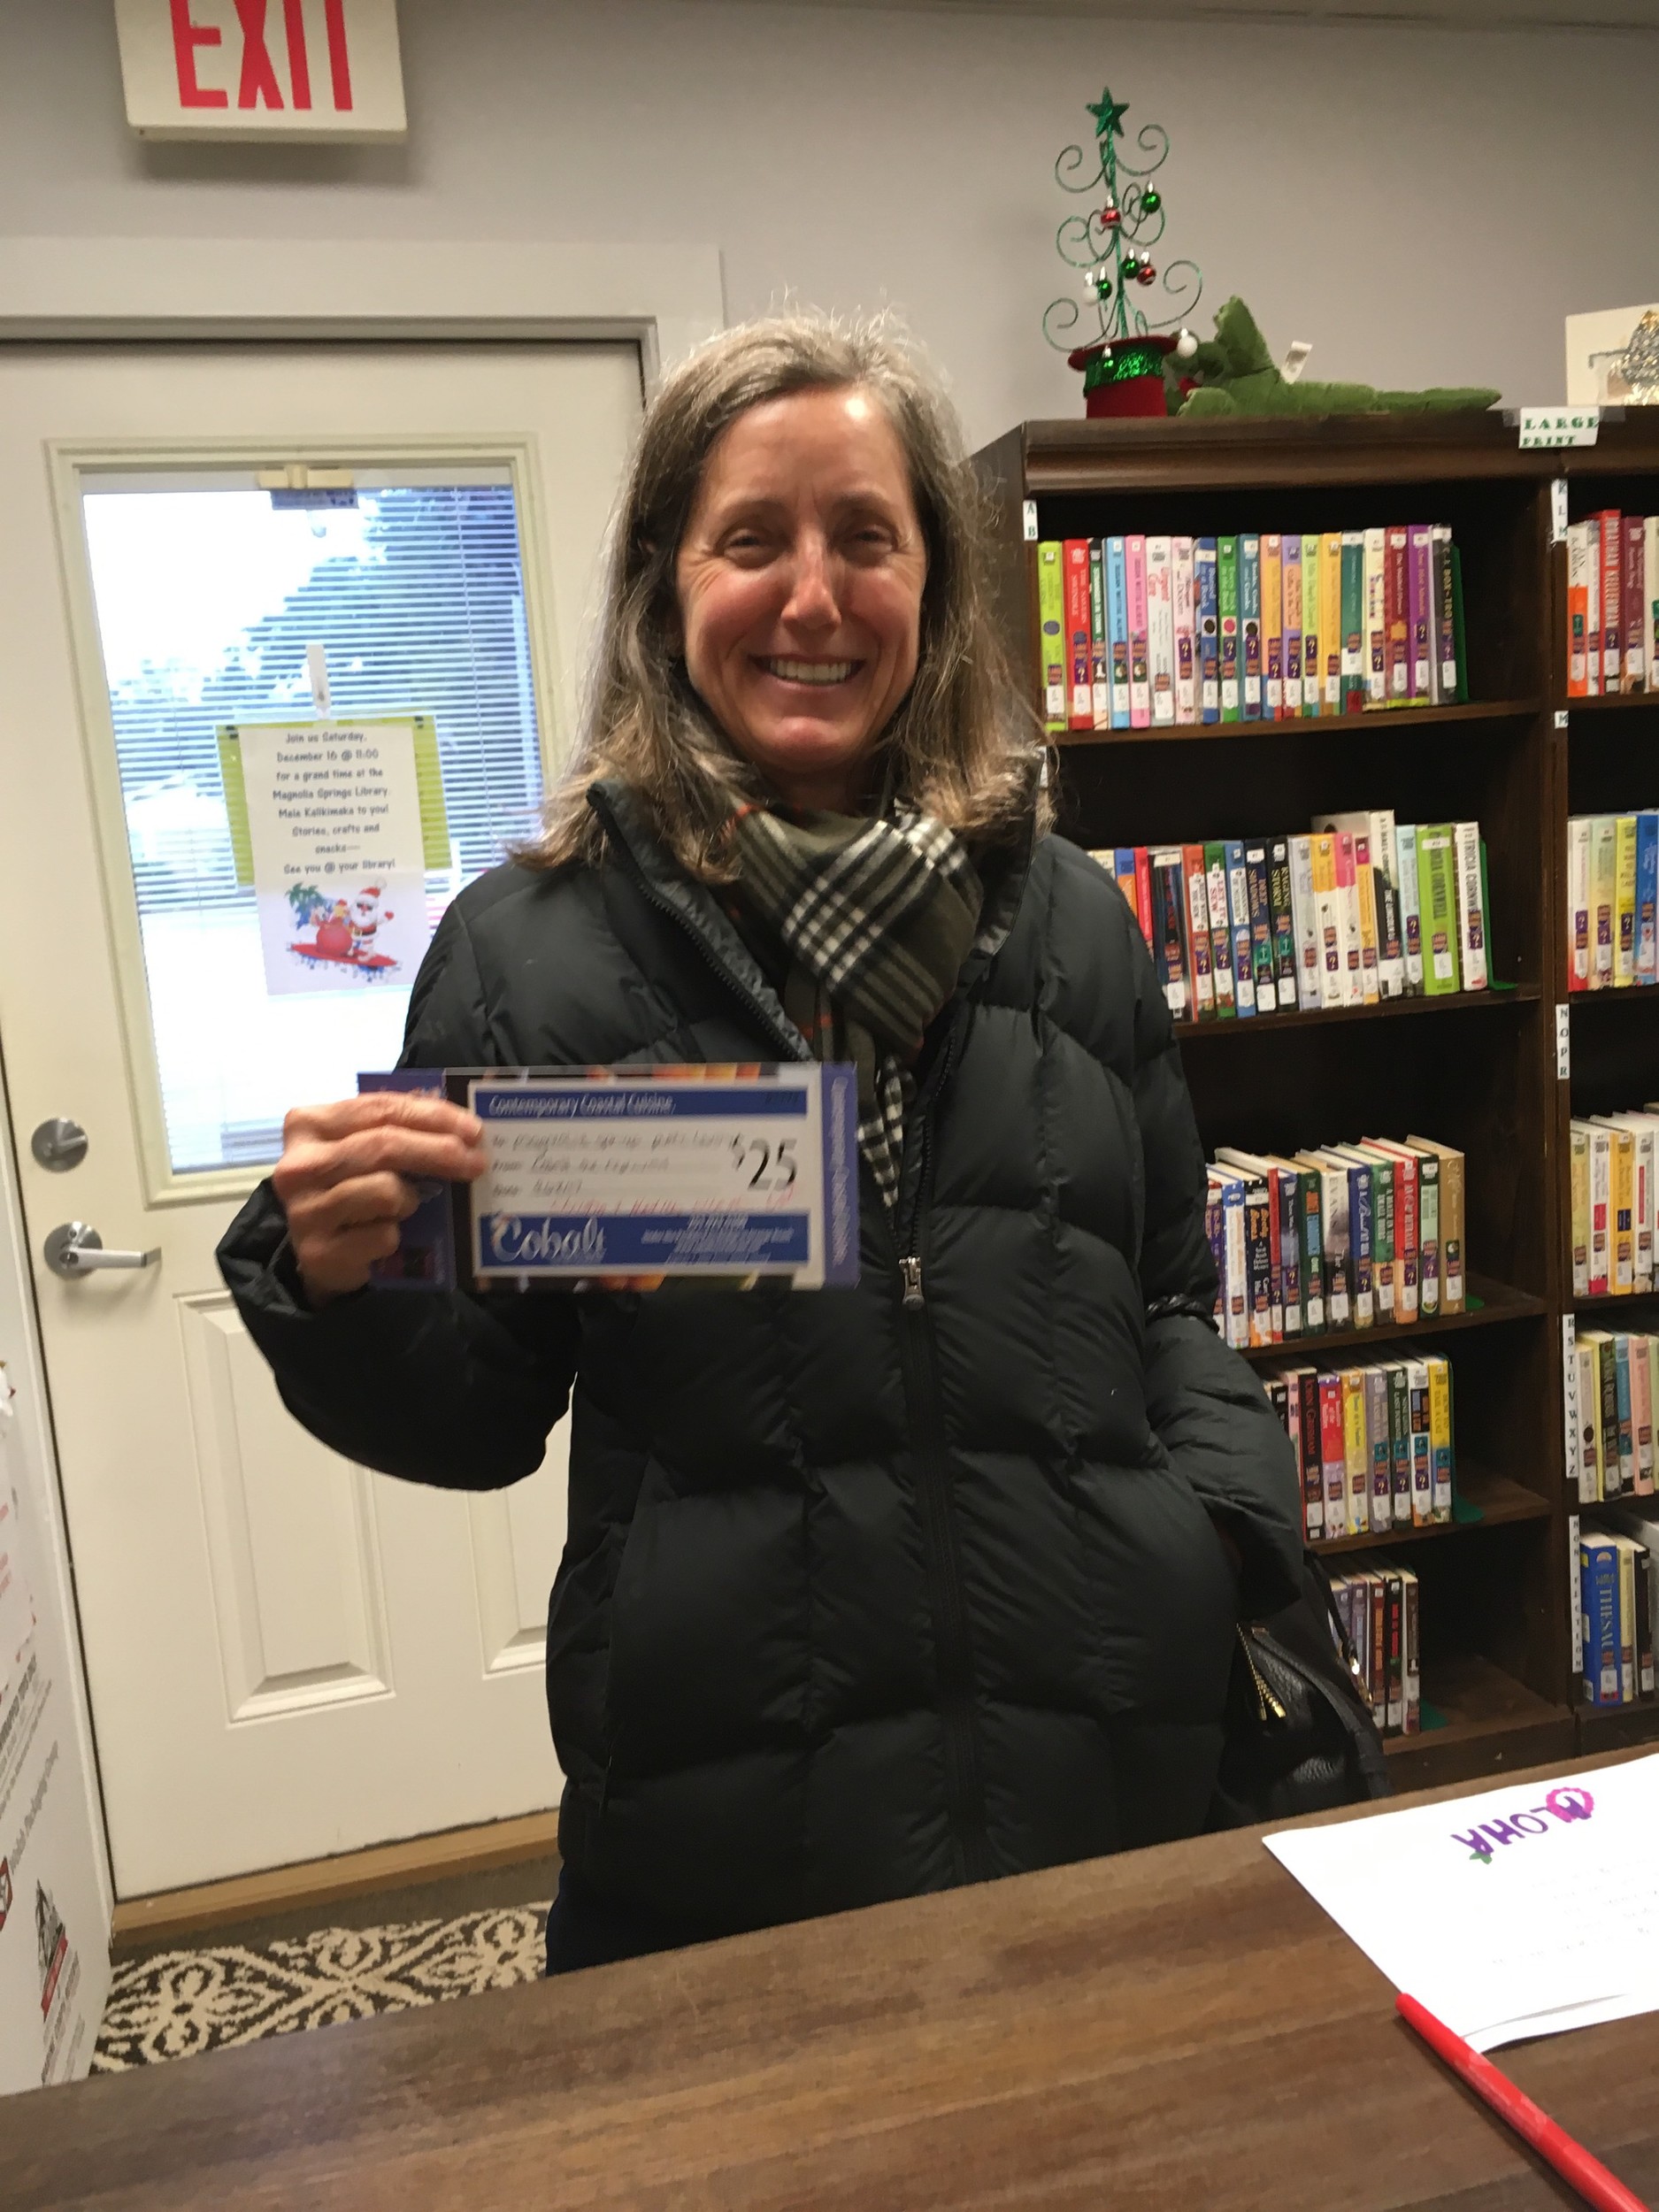 Proud supporter of The Magnolia Springs Library Kristin Weaver with her gift certificate to Cobalt’s Restaurant.